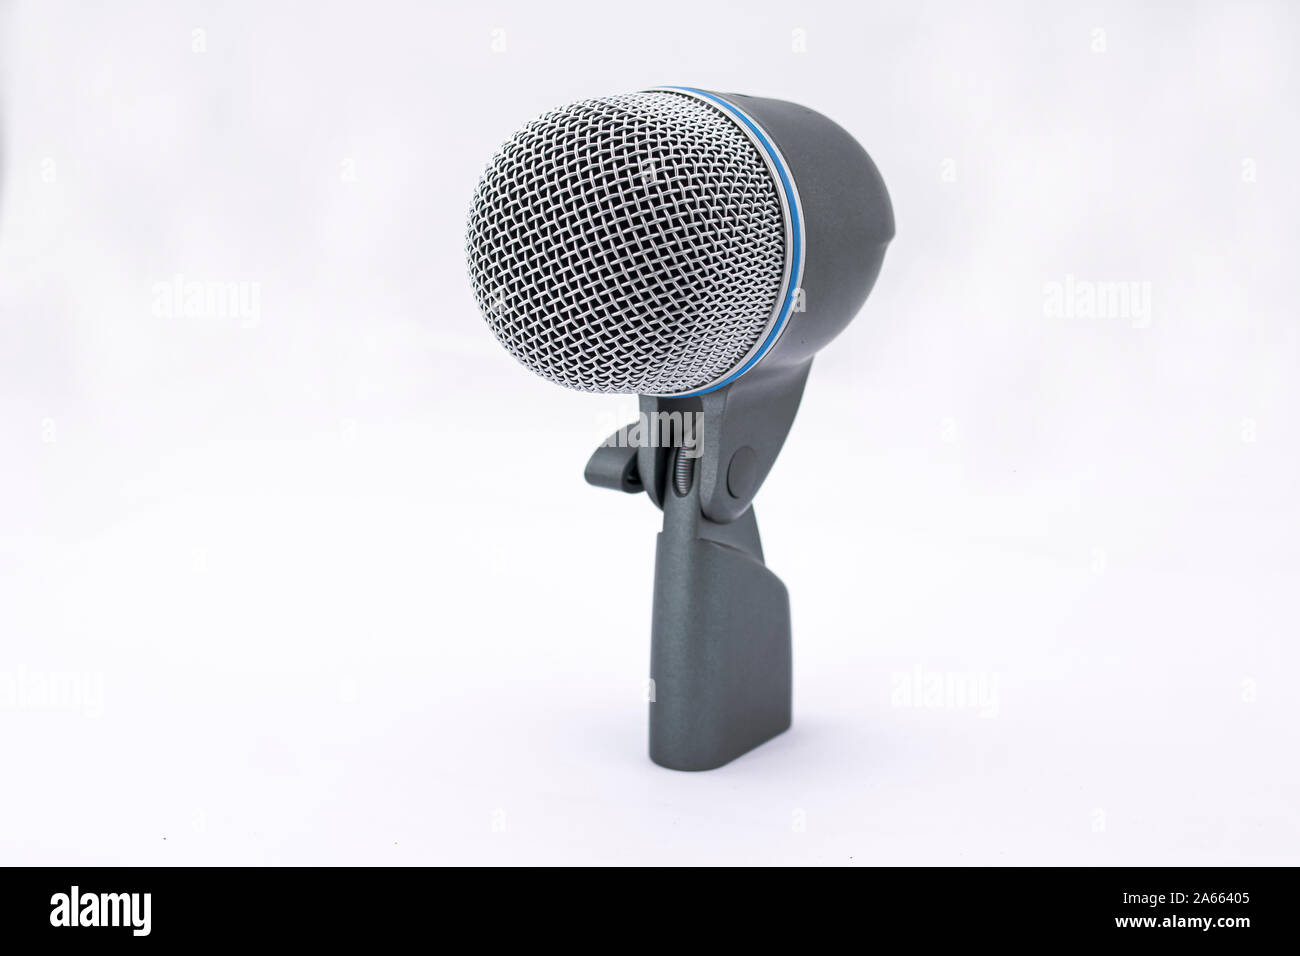 Microphone and music instrument. Microphone in a recording studio with drum  on background Stock Photo - Alamy